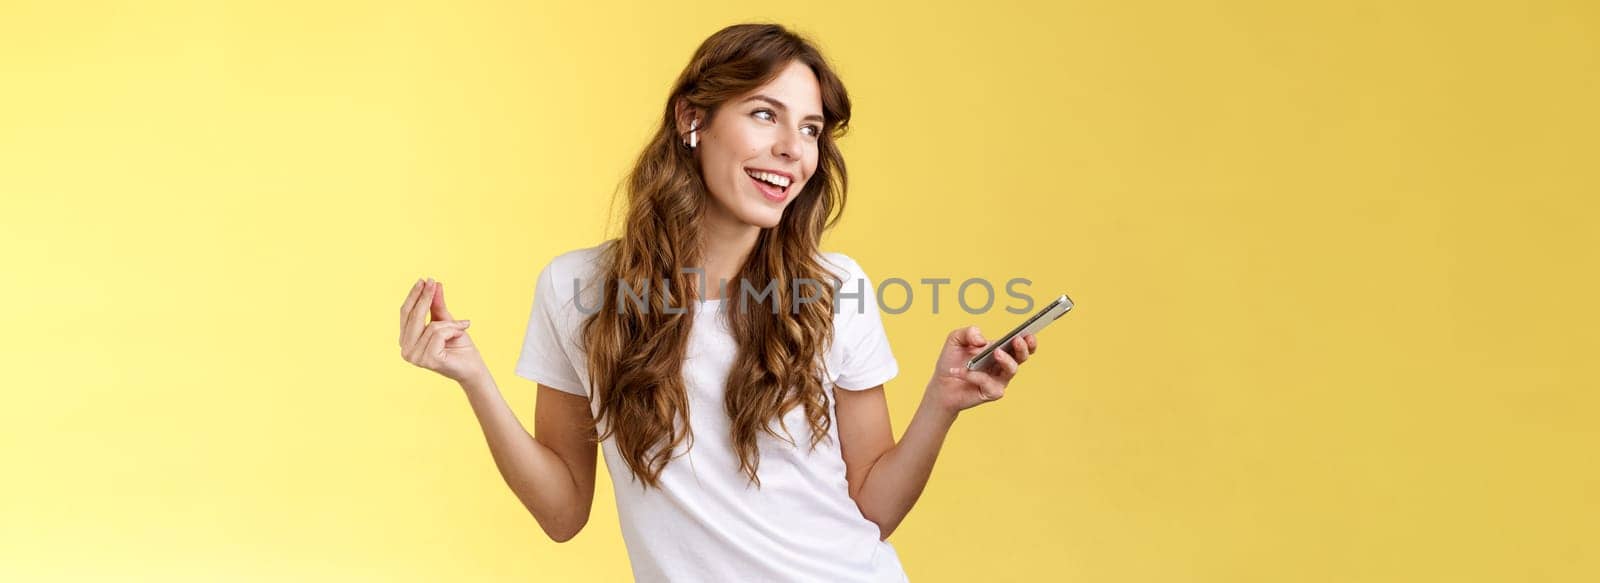 Girl enjoying music listening song wireless earbuds dancing lively carefree look away smiling broadly hold smartphone found new track partying alone soundtrack favorite movie yellow background. Lifestyle.